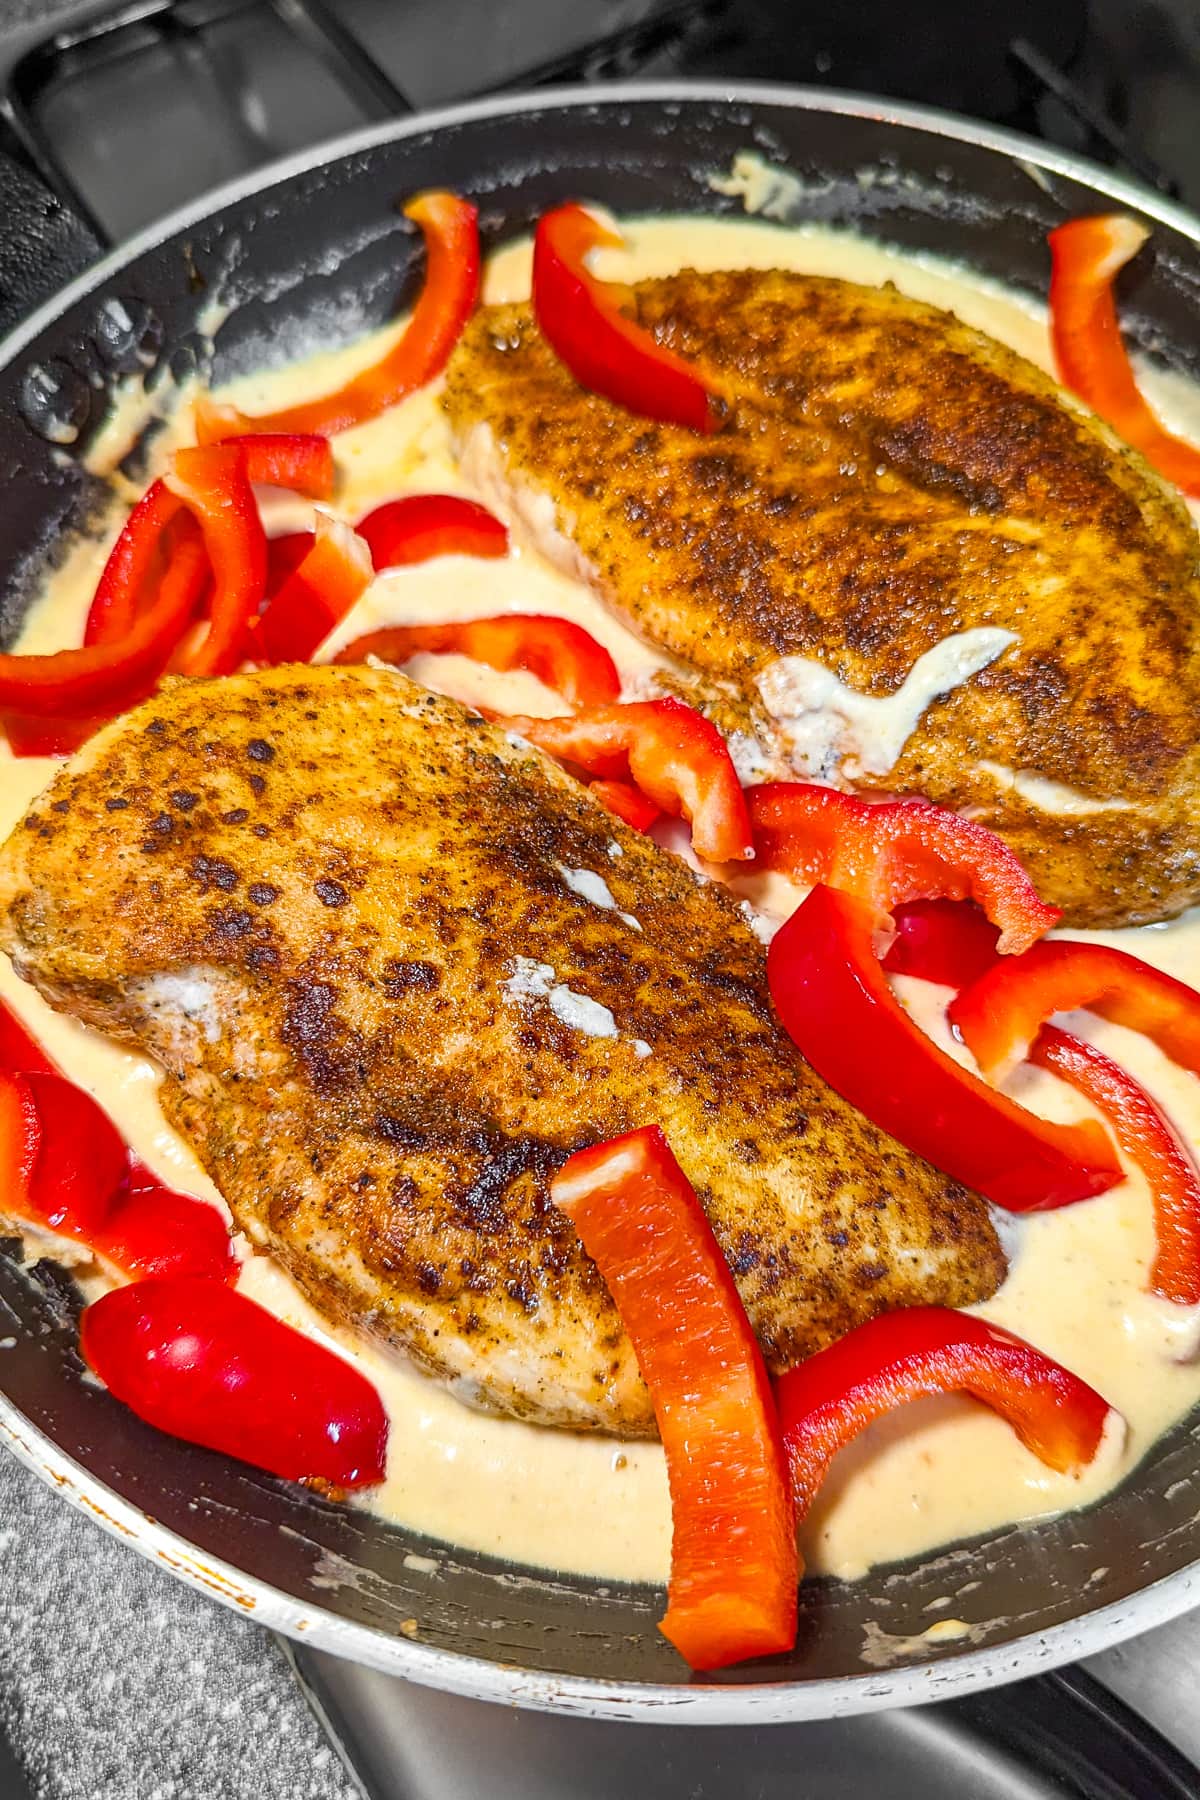 Fried chicken breast in a creamy sauce with bell pepper slices.